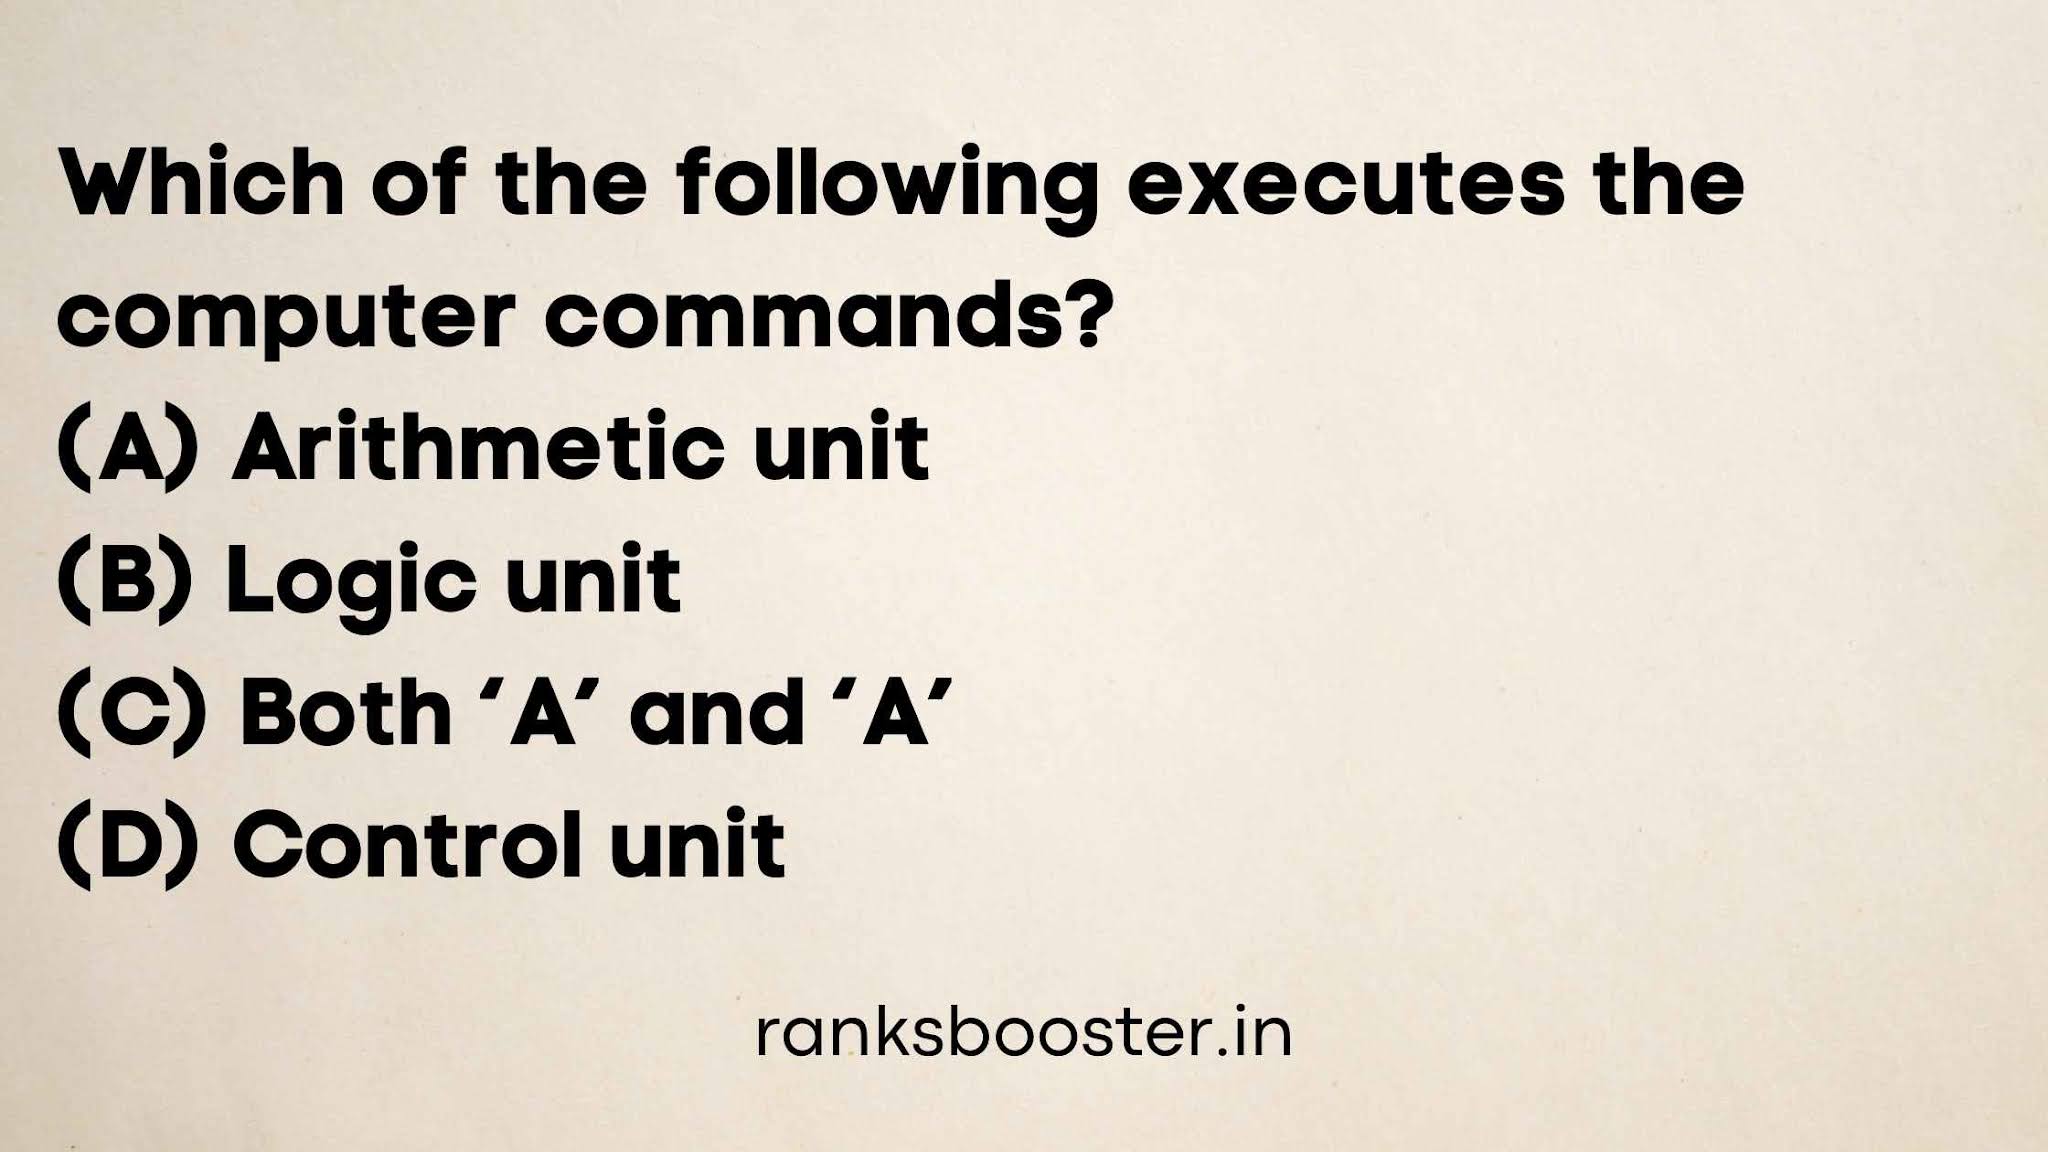 Which of the following executes the computer commands? (A) Arithmetic unit (B) Logic unit (C) Both ‘A’ and ‘B’ (D) Control unit